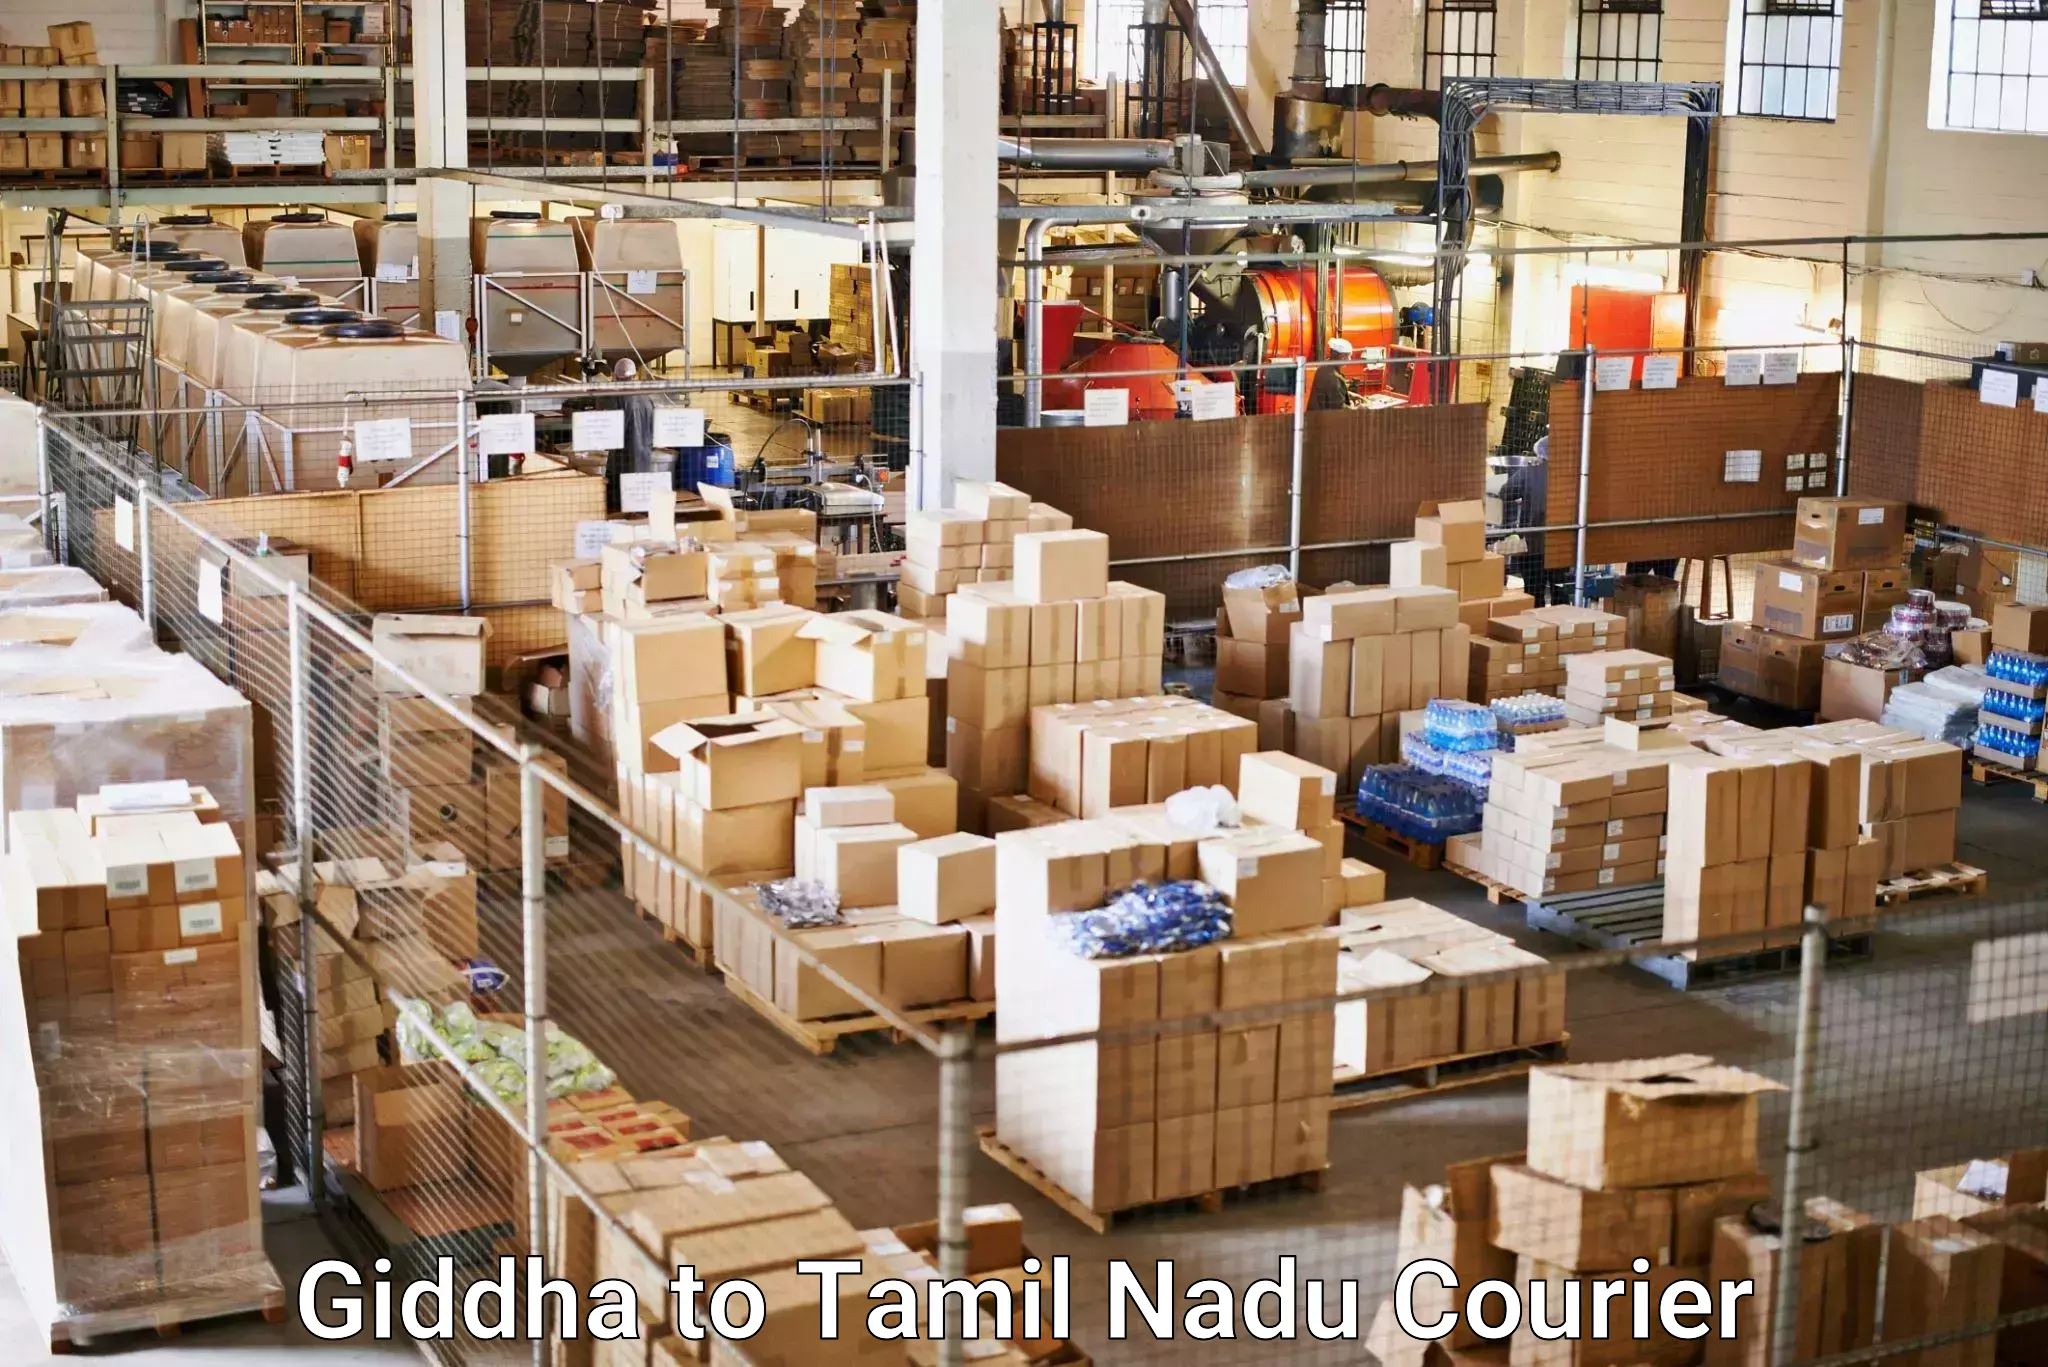 Comprehensive delivery network Giddha to Mettur